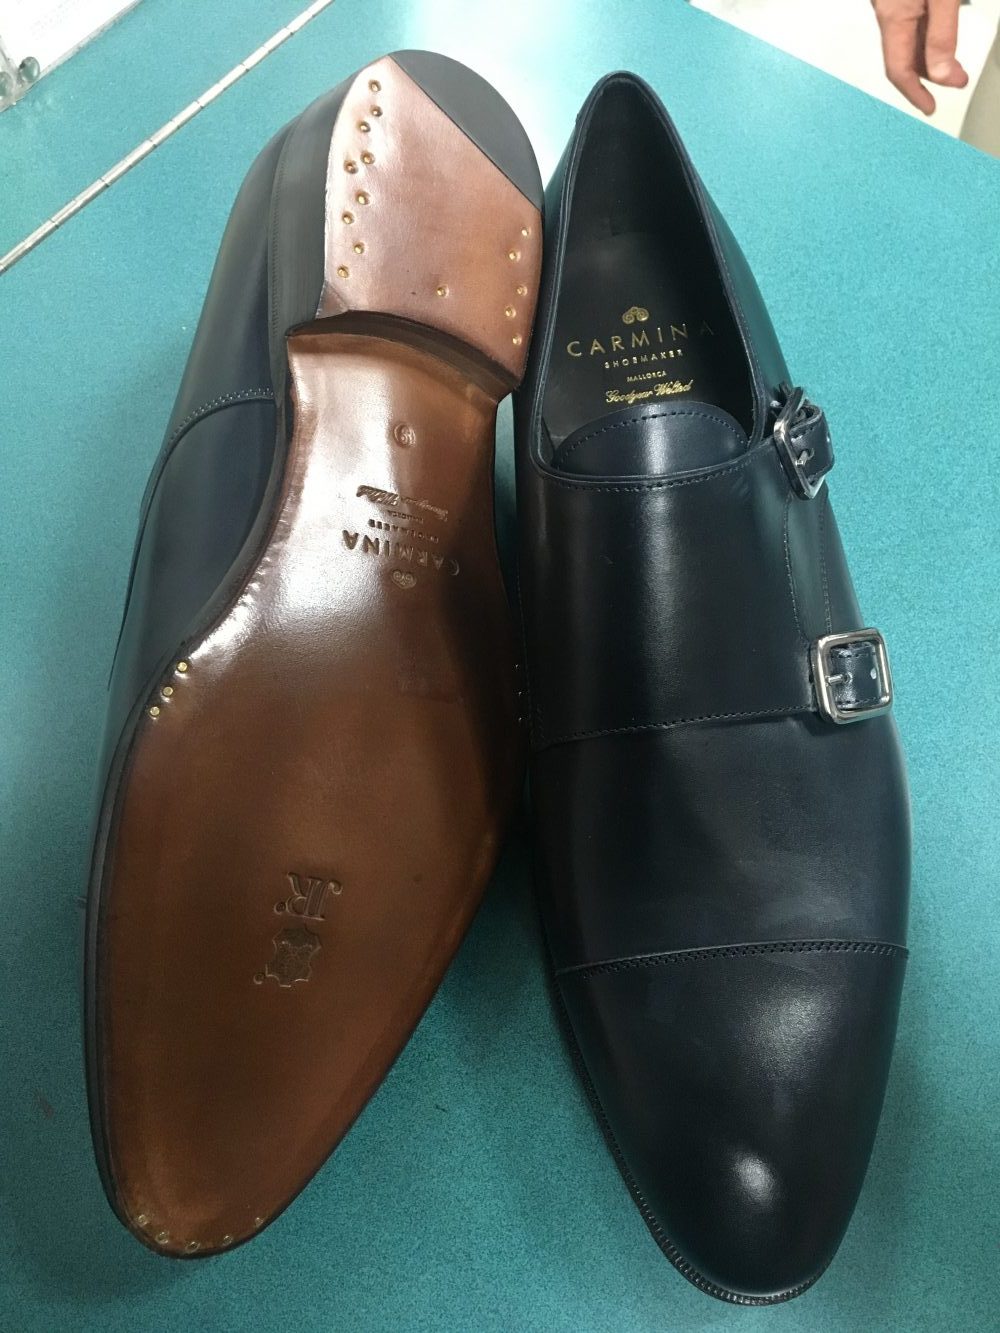 Men's Full Soles, Re-Soled with German Prem Leather, English Heels ...